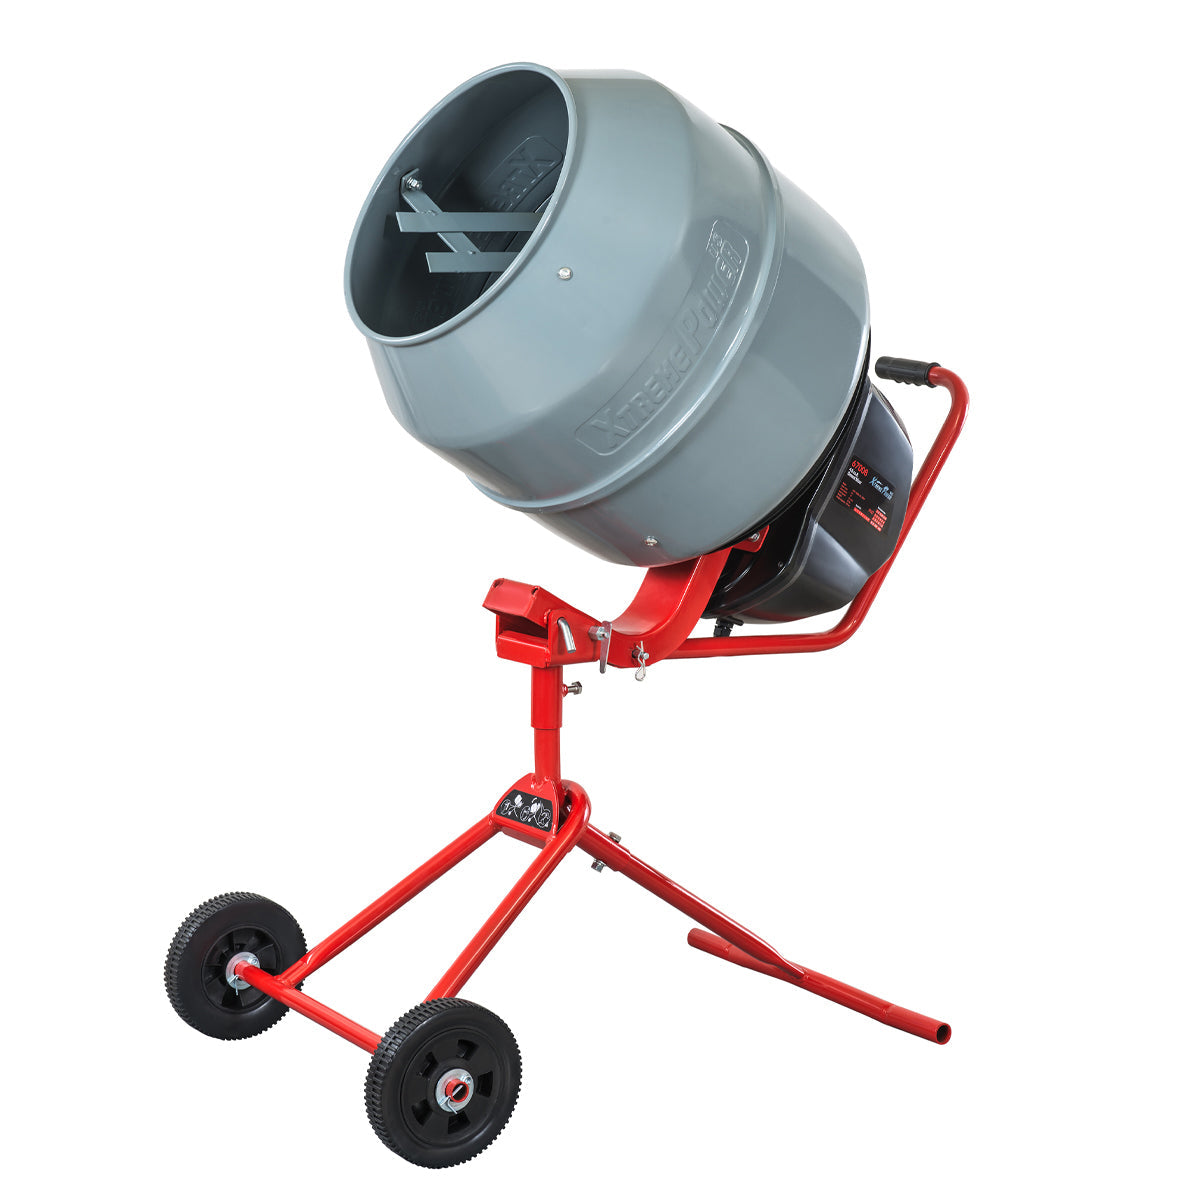  2600W Electric Hand-Held Cement Mixer Stirring Tool